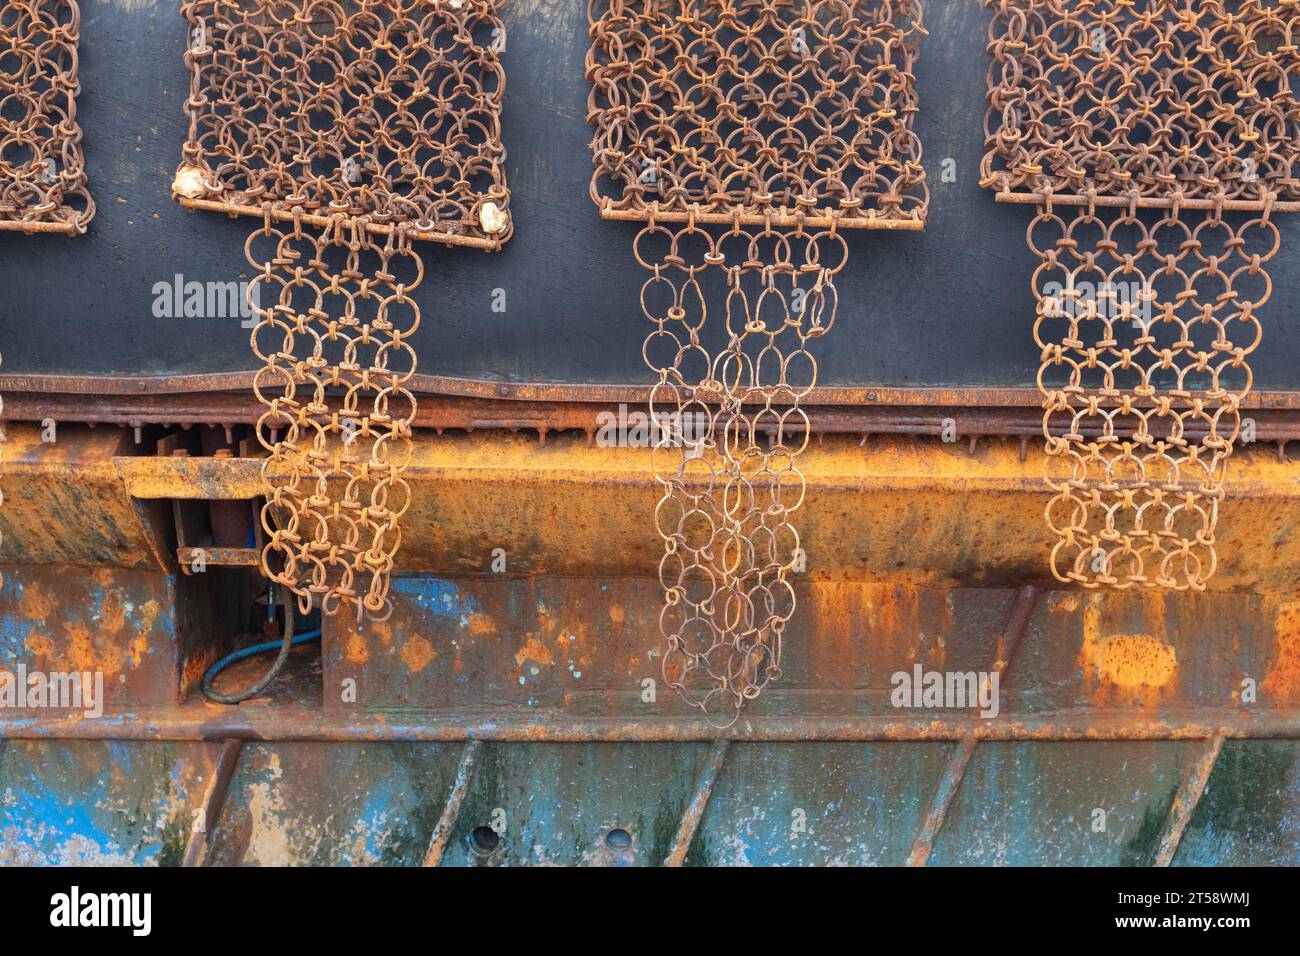 Another side view of a scallop dredging fishing boat showing the heavy duty metal framed nets called scallop dredges, Kirkcudbright, Scotland. Stock Photo